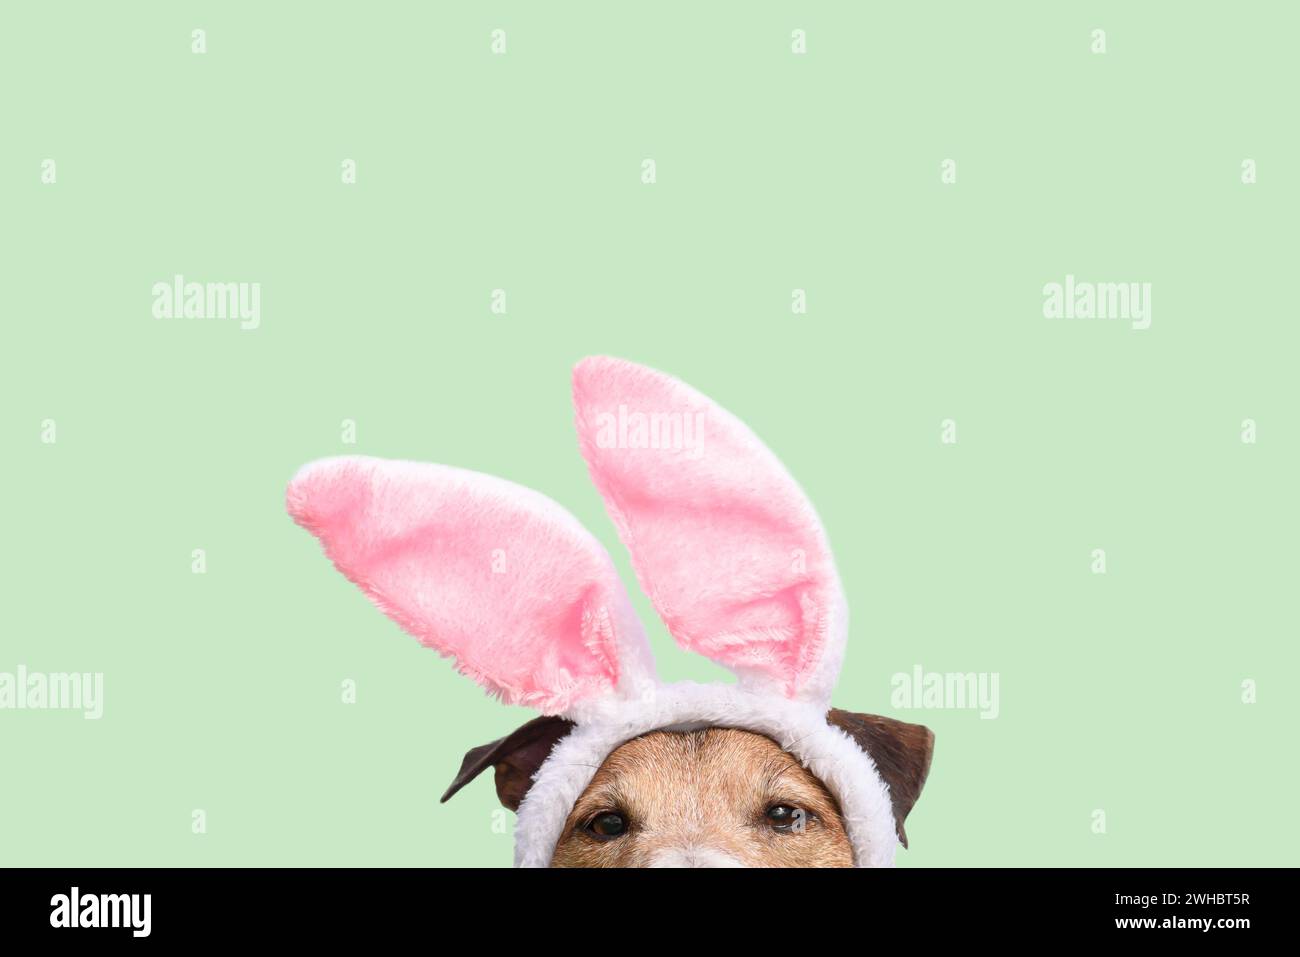 Easter background with dog wearing bunny ears costume Stock Photo